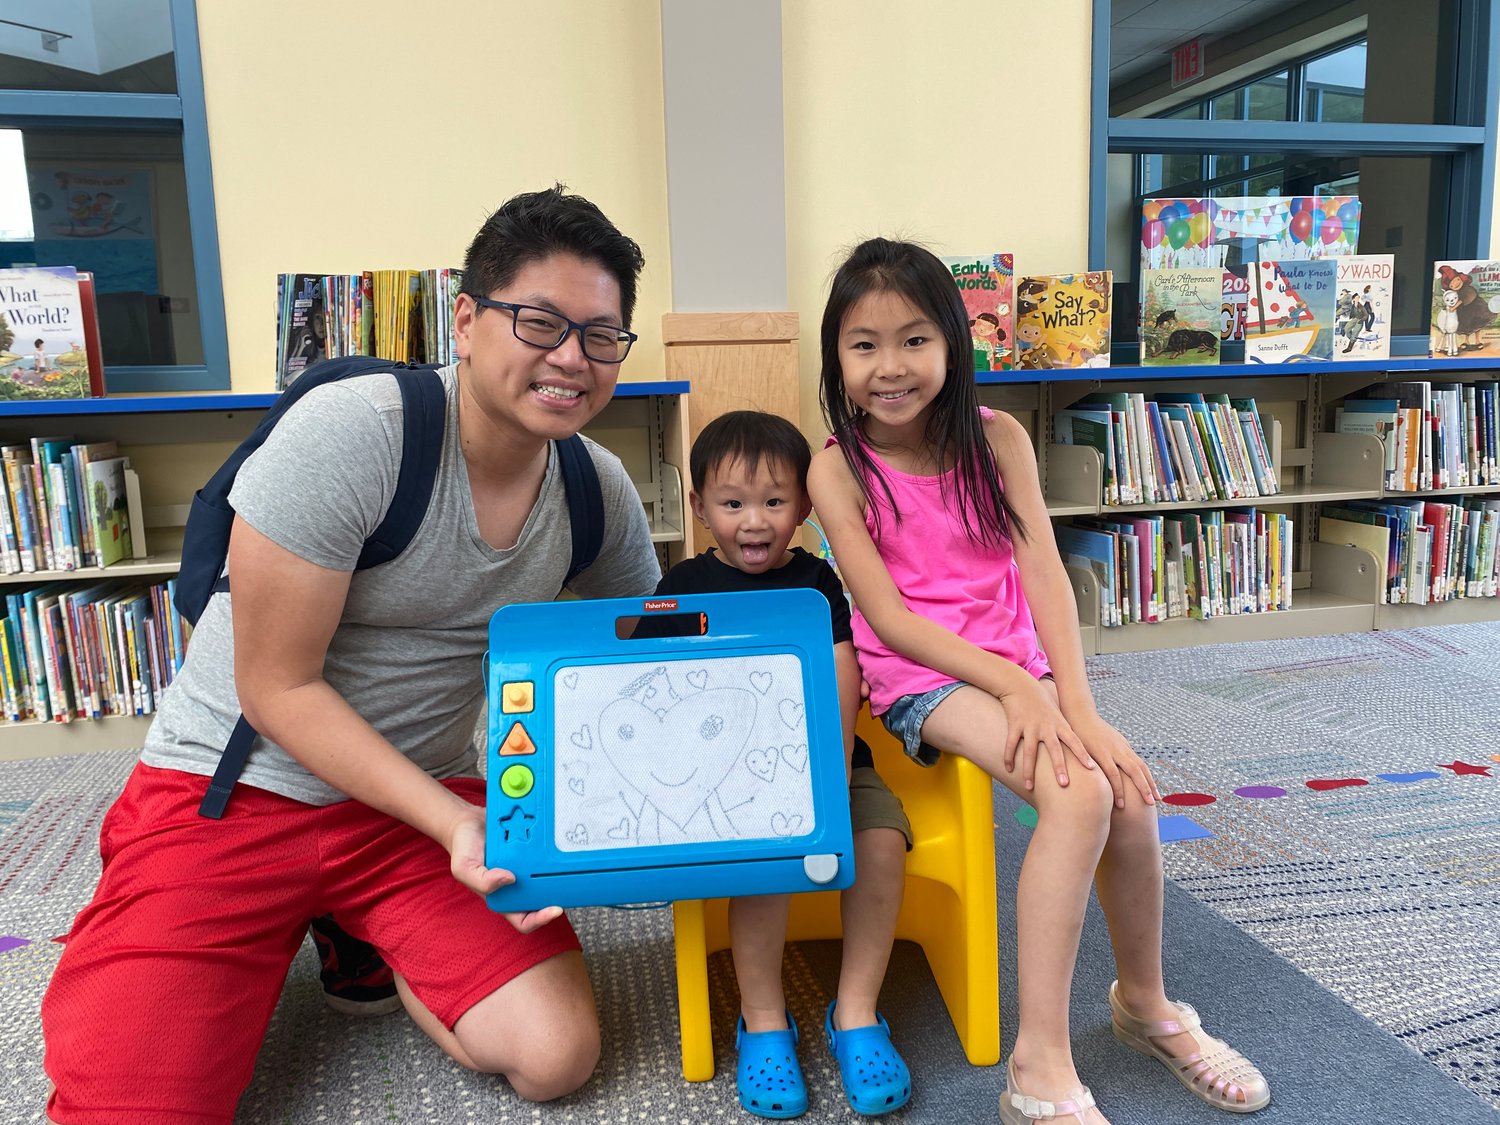 Beethoven Bong and his children Simon, 2.5, and Hope ,6, stopped by to enjoy the children's room in the library.